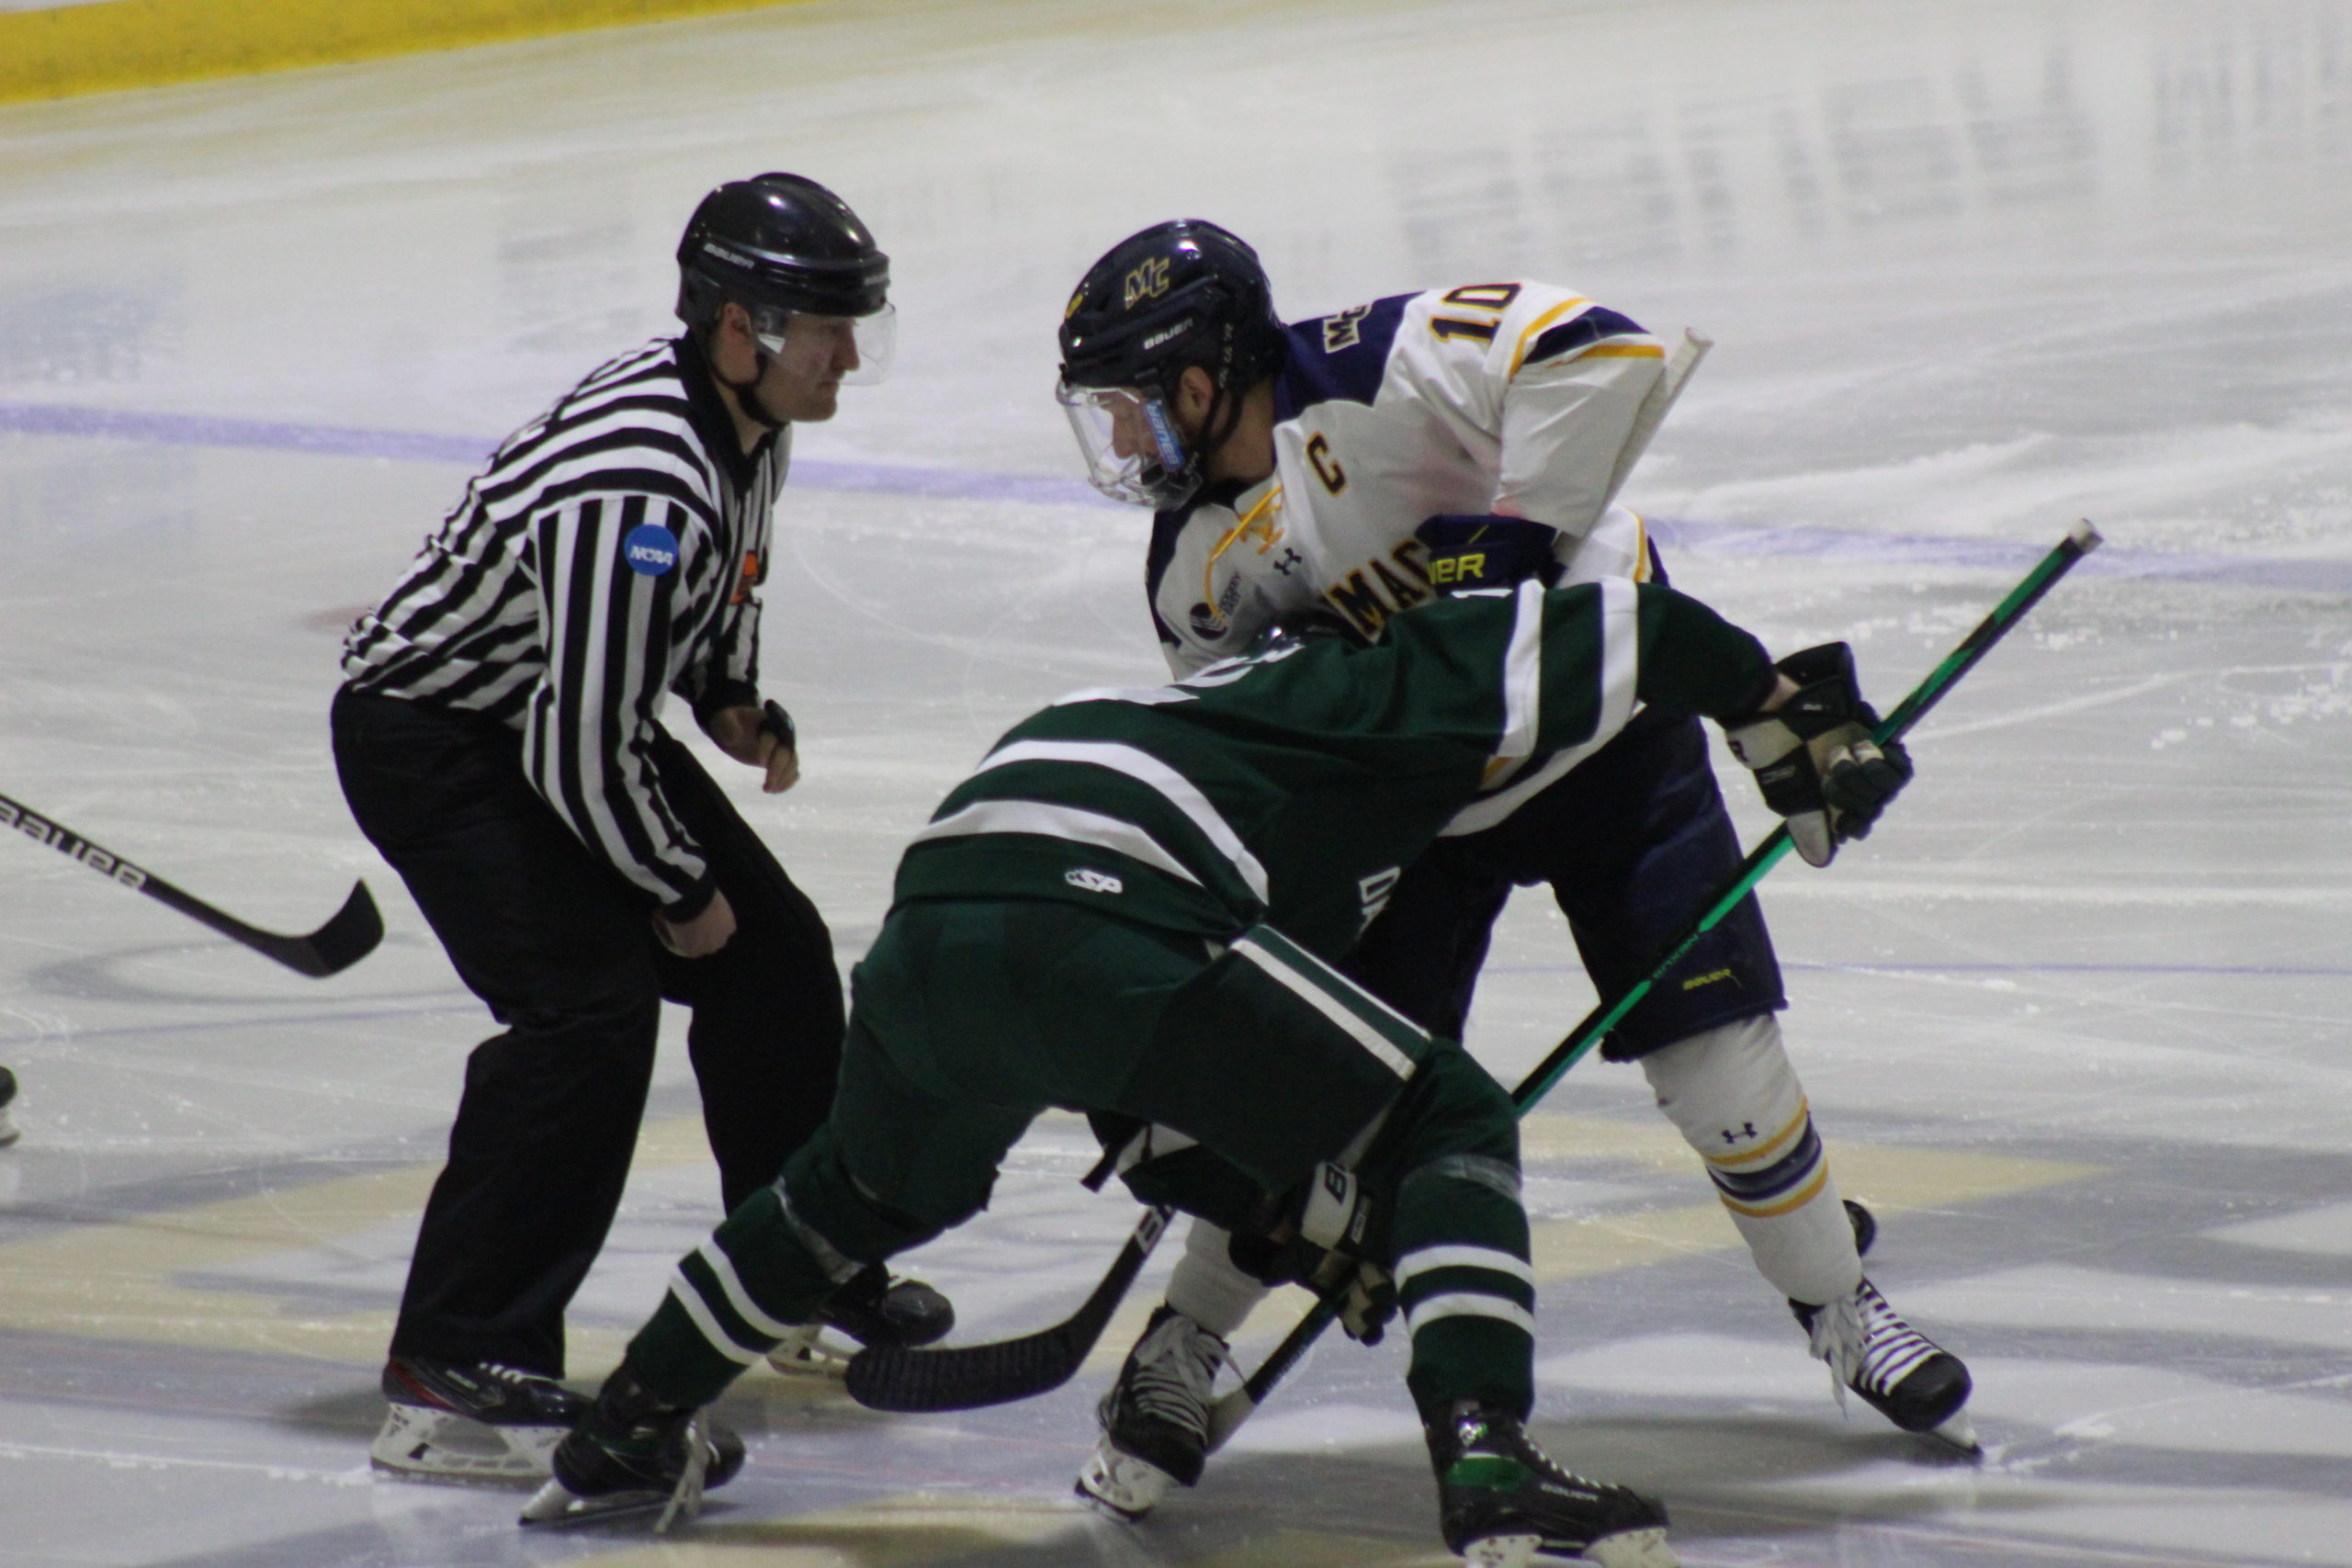 Dartmouth and Merrimack Skate to 2-2 Tie